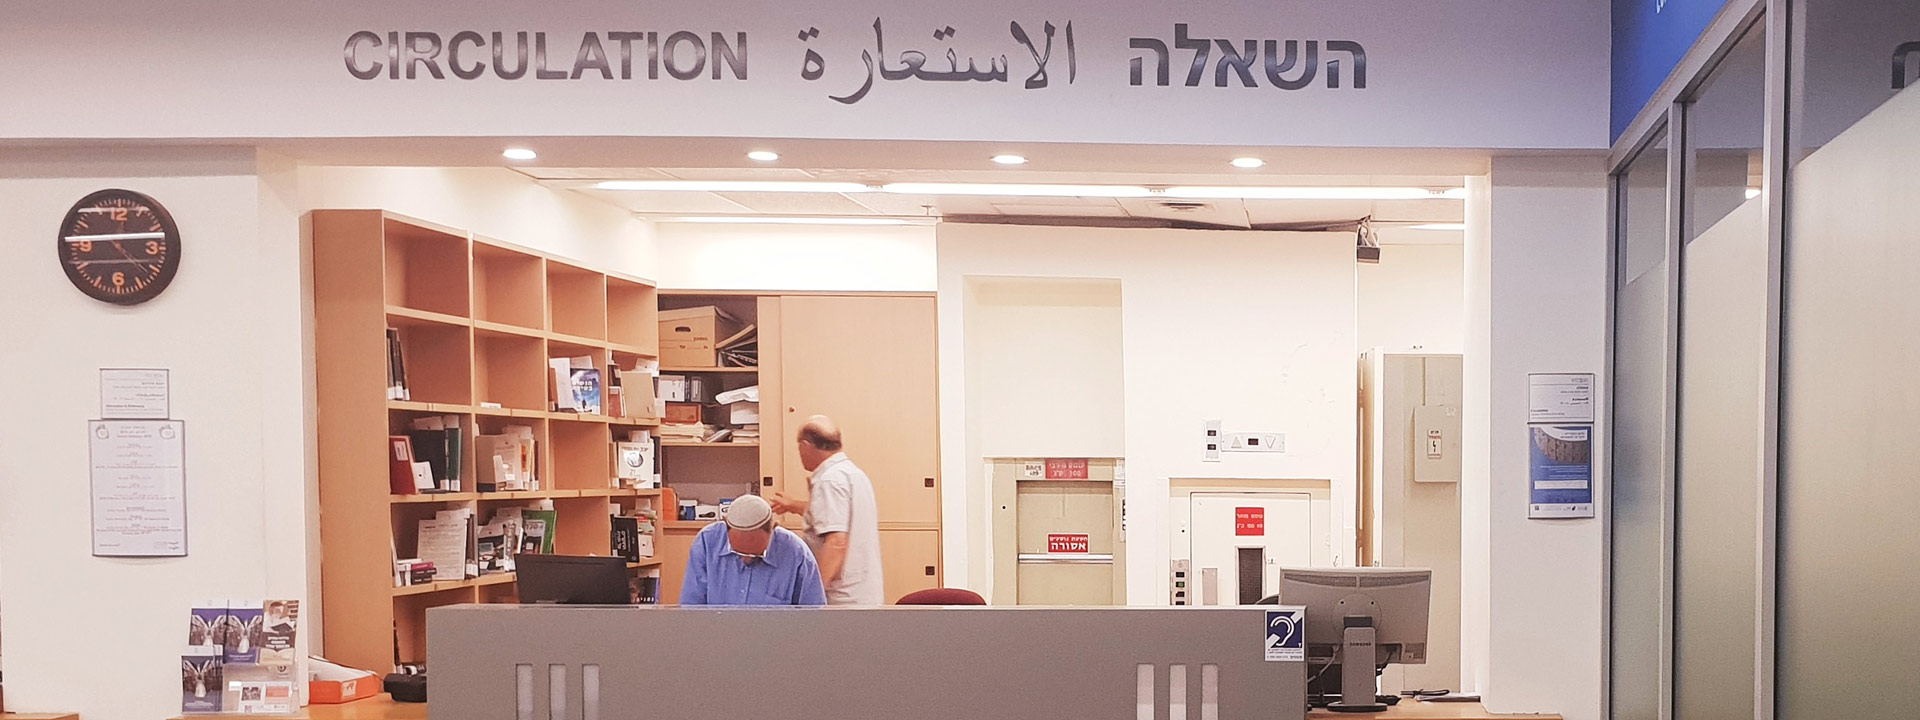 Borrowing books and materials from the National Library fo Israel